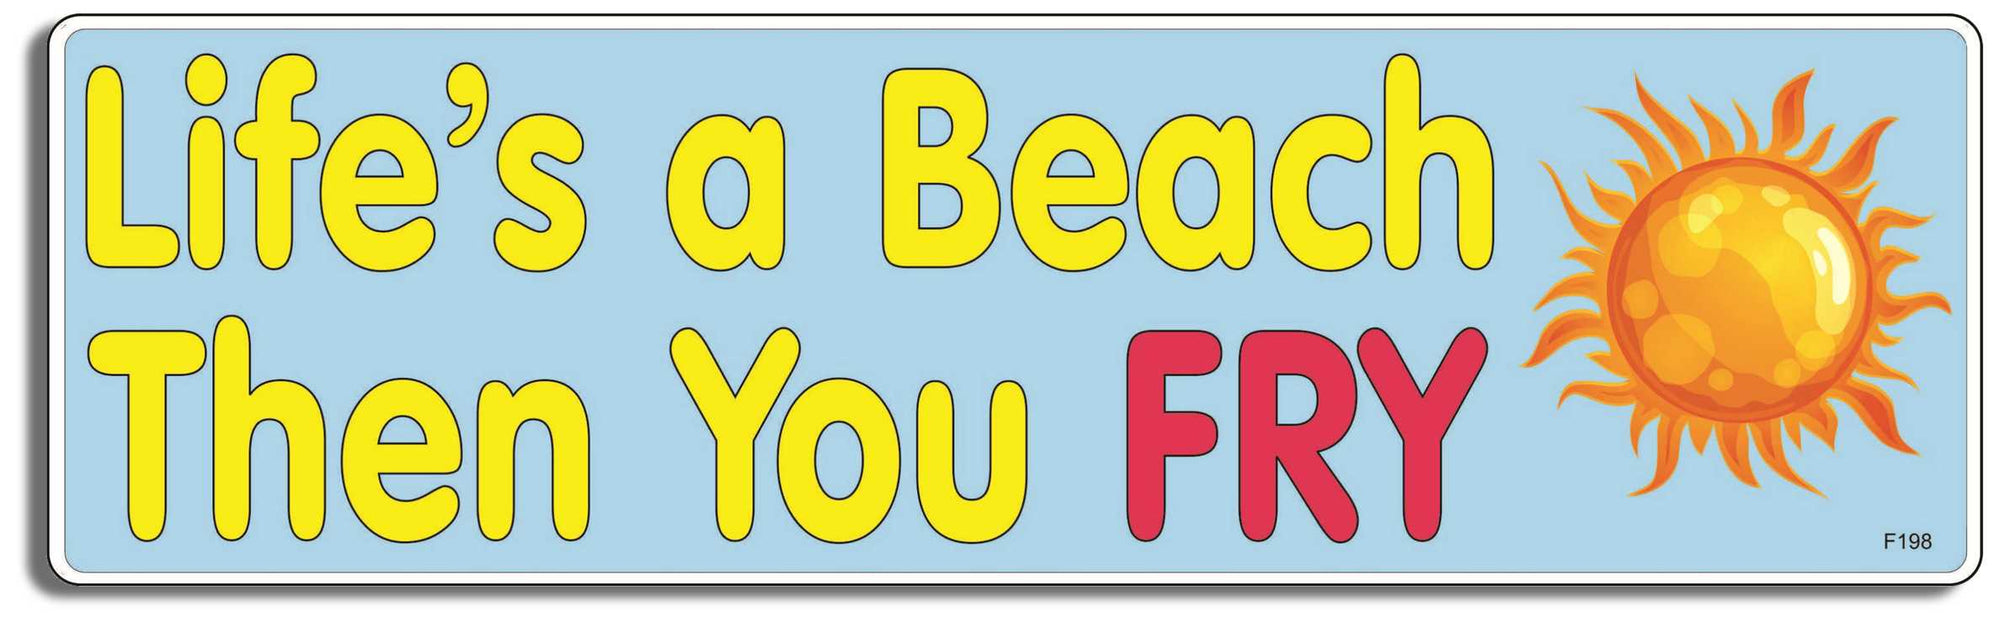 Life's a Beach Then You FRY  -  3" x 10" -  Decal Bumper Sticker-funny Bumper Sticker Car Magnet Life's a Beach Then You FRY-   Decal for carsbeach, funny, funny quote